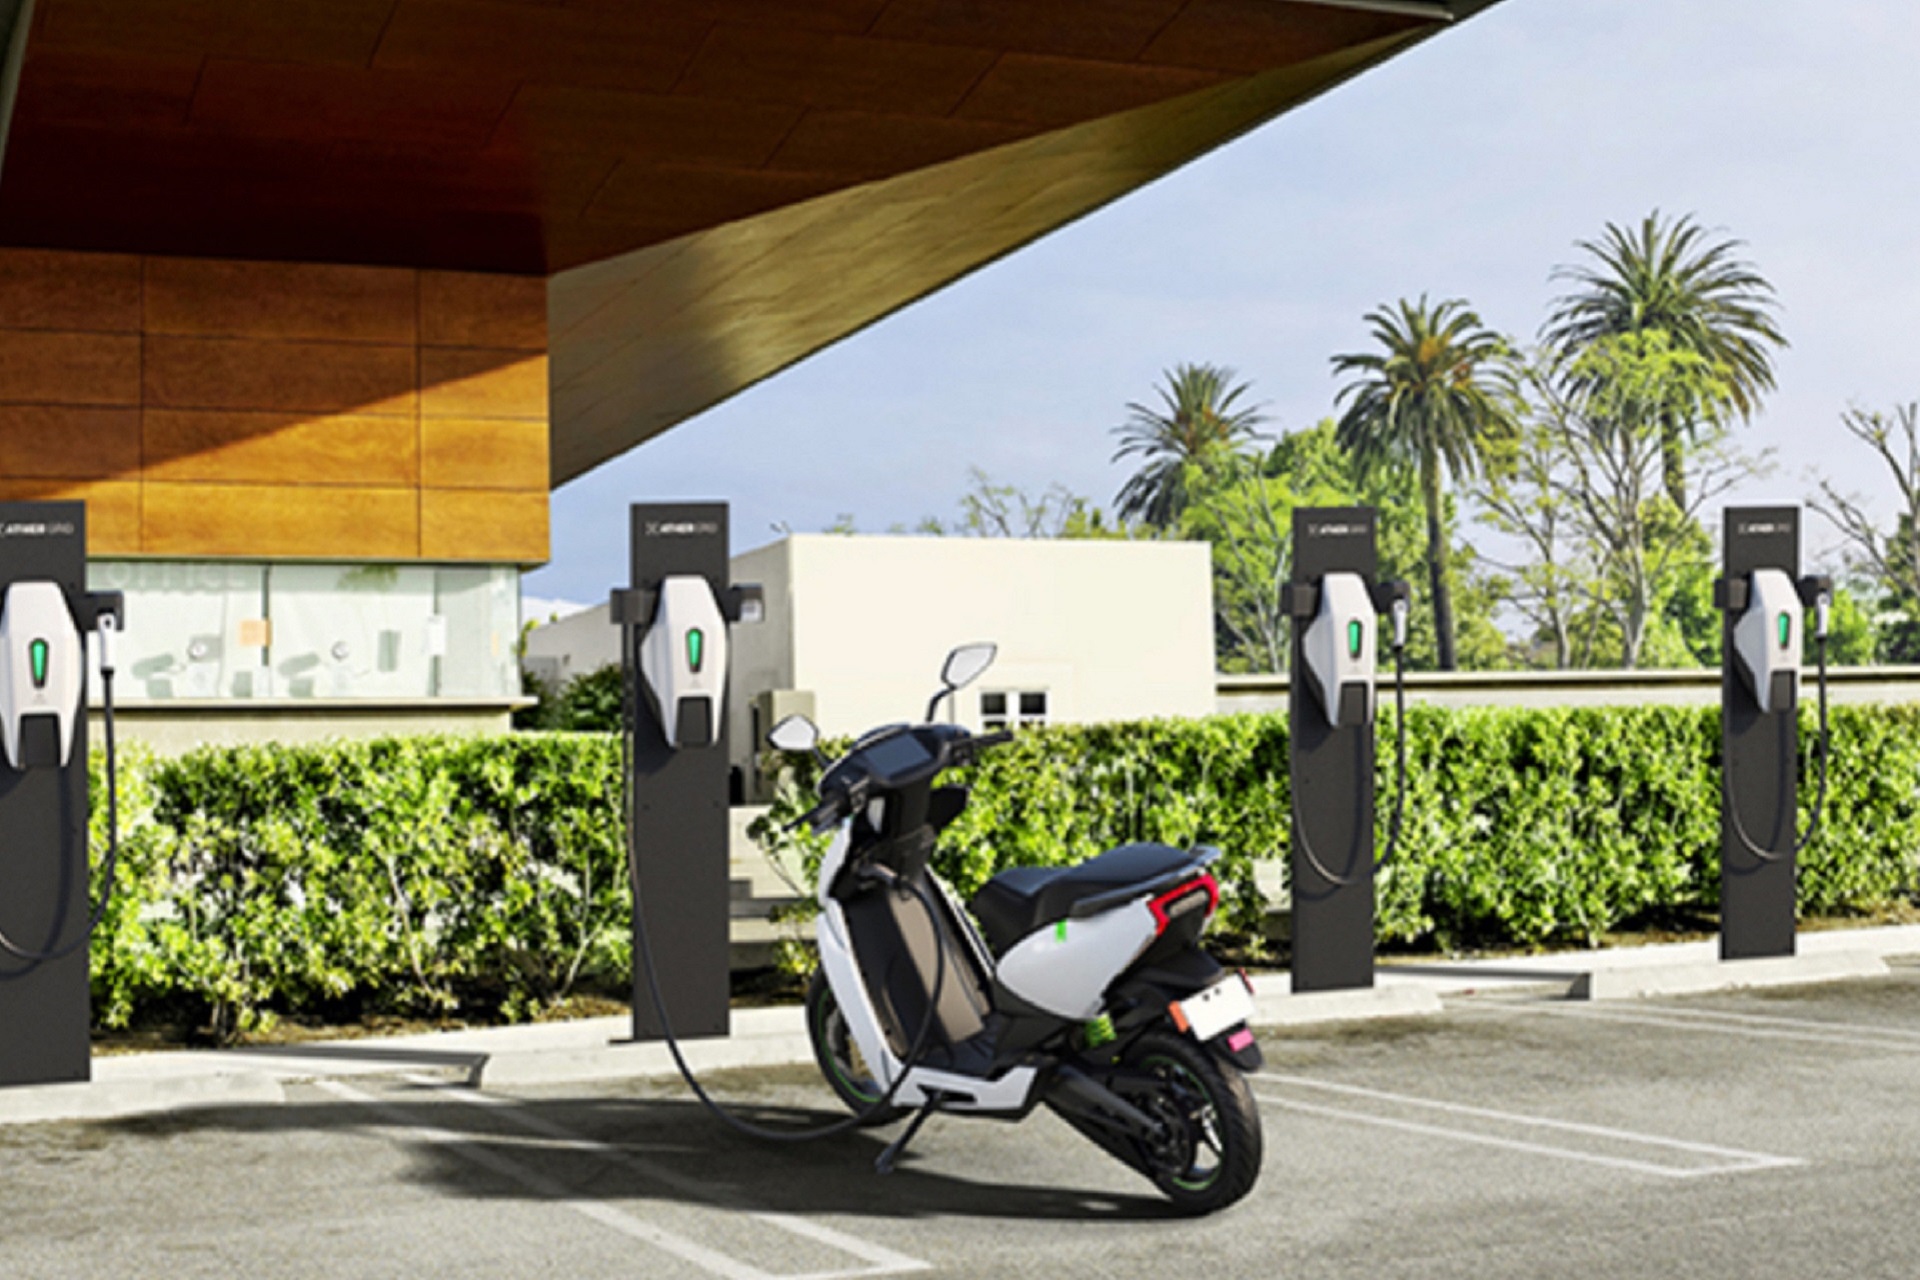 TVS Motor Signs MoU With Tata Power On Electric Two-Wheeler Charging Ecosystem in India